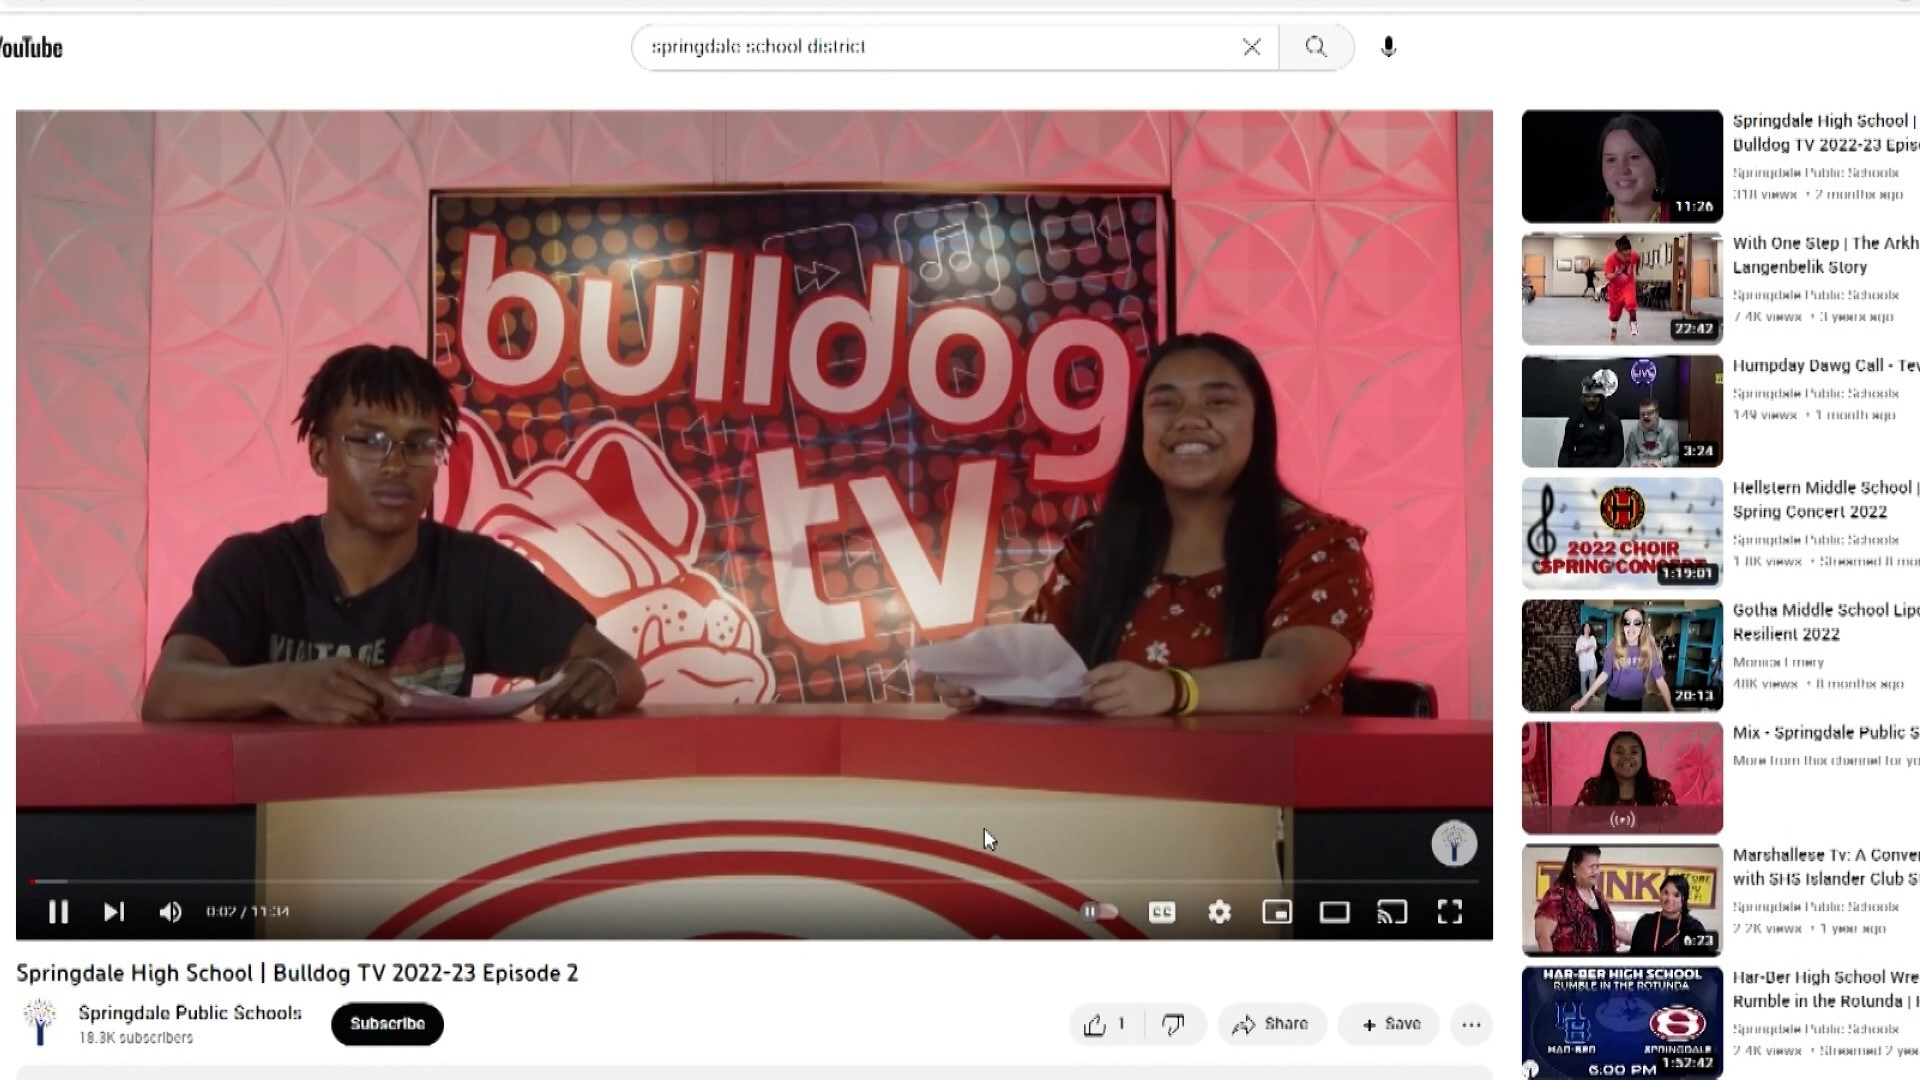 Springdale schools just reached a major milestone on its YouTube — 10 million views.